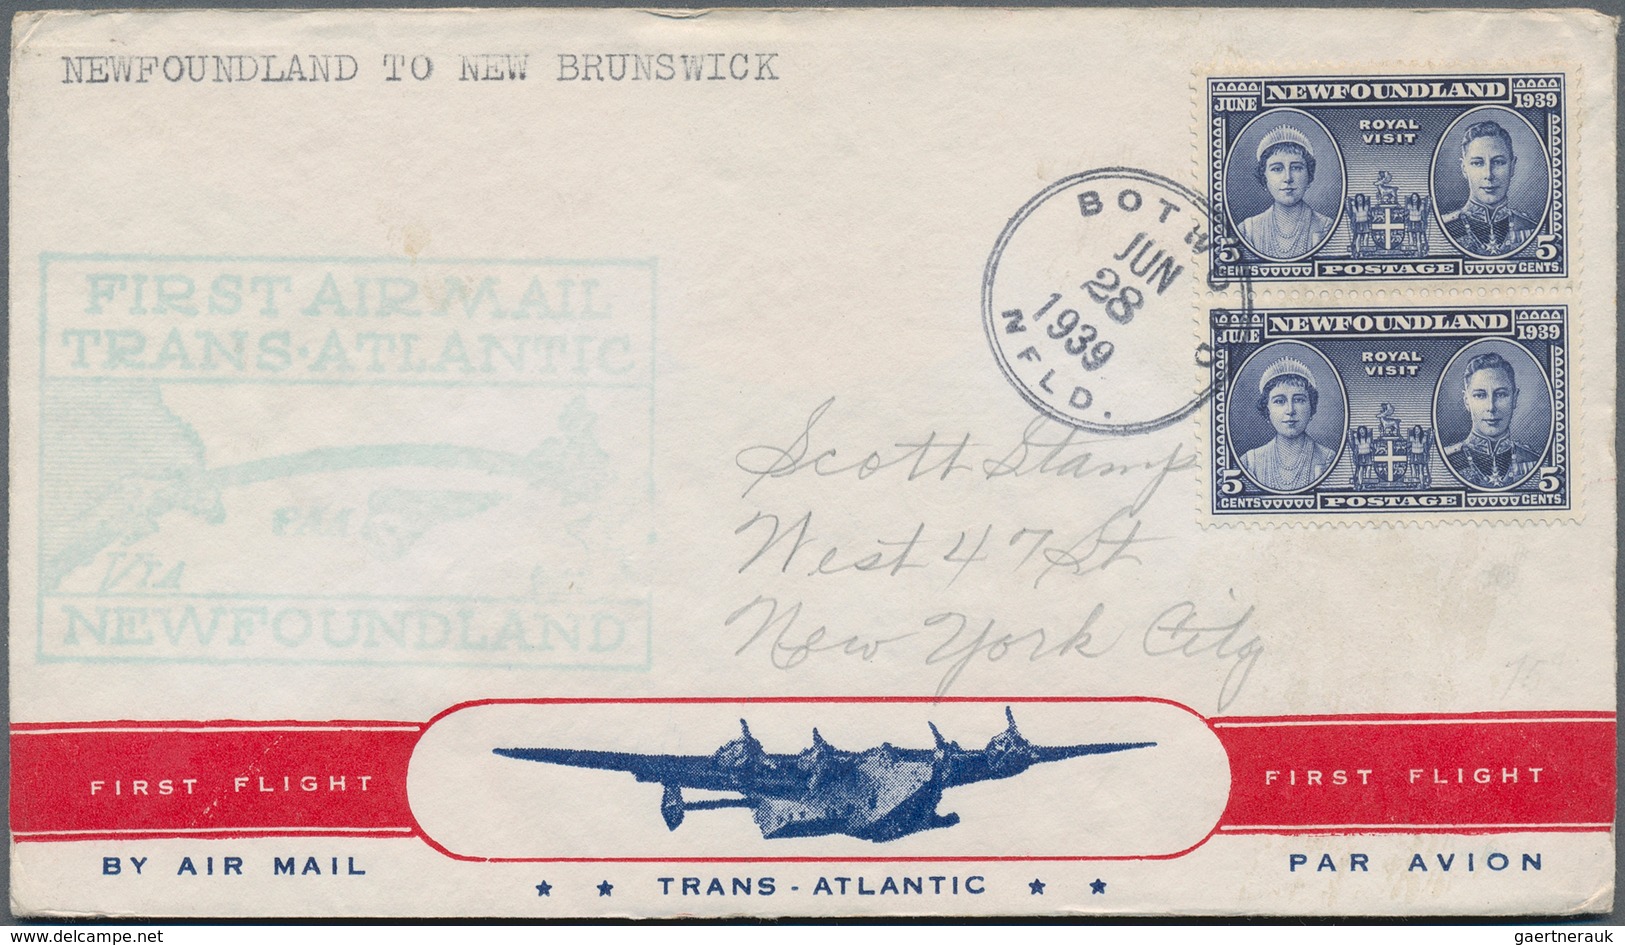 Flugpost Europa: 1939 (May to August), air mail Transatlantic Clipper and Imperial Airways, 61 cover